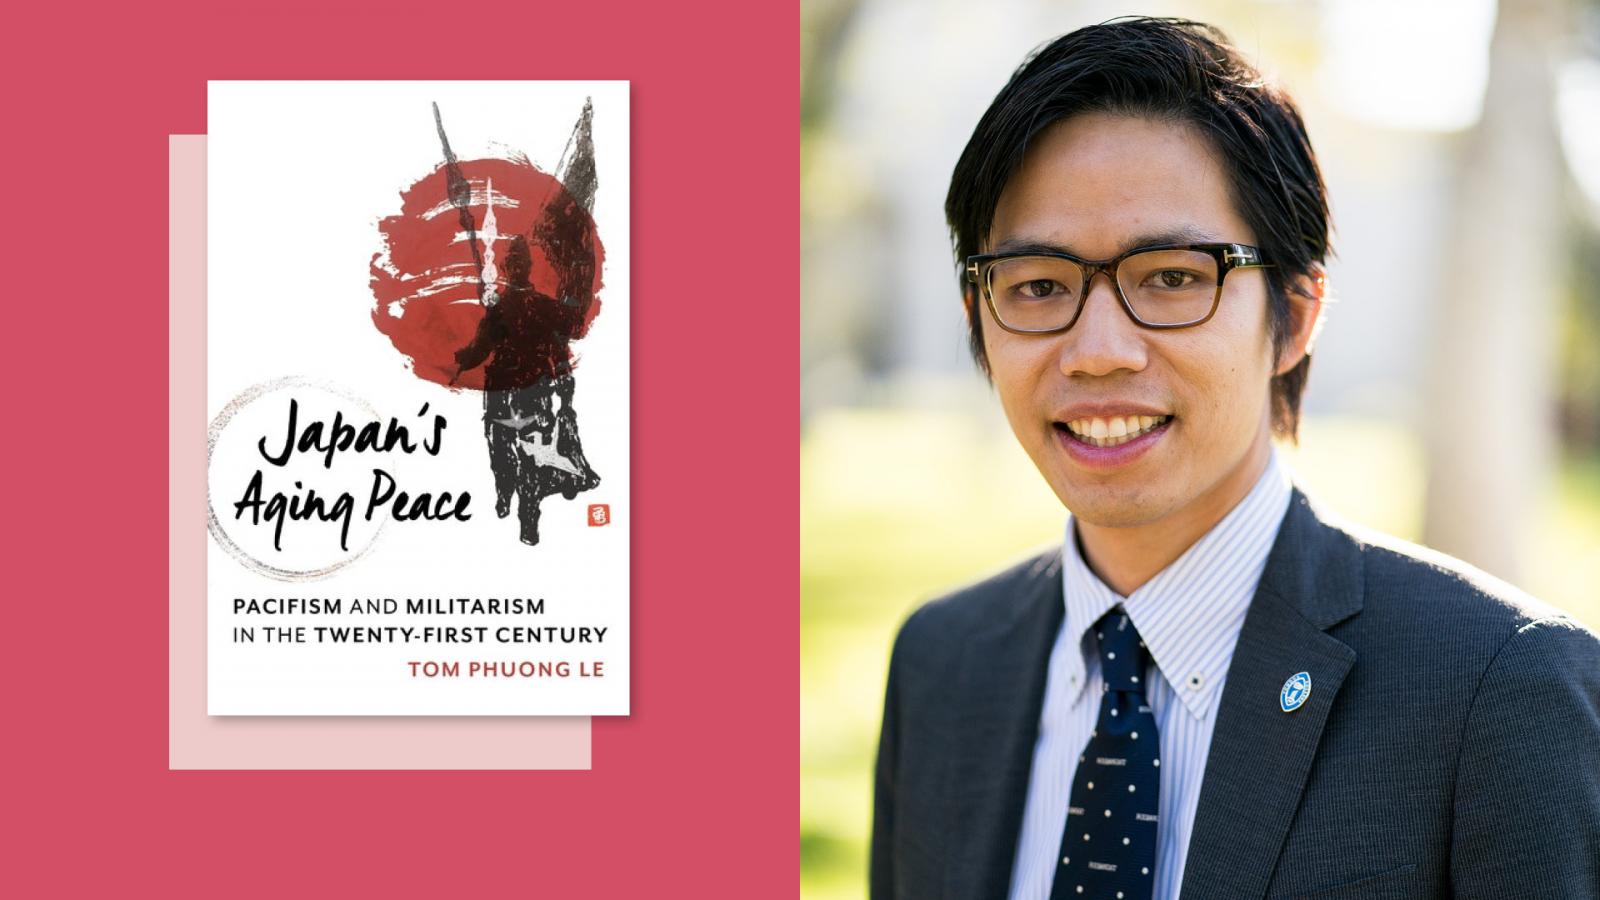 Professor Tom Le and the cover of his new book, "Japan's Aging Peace."